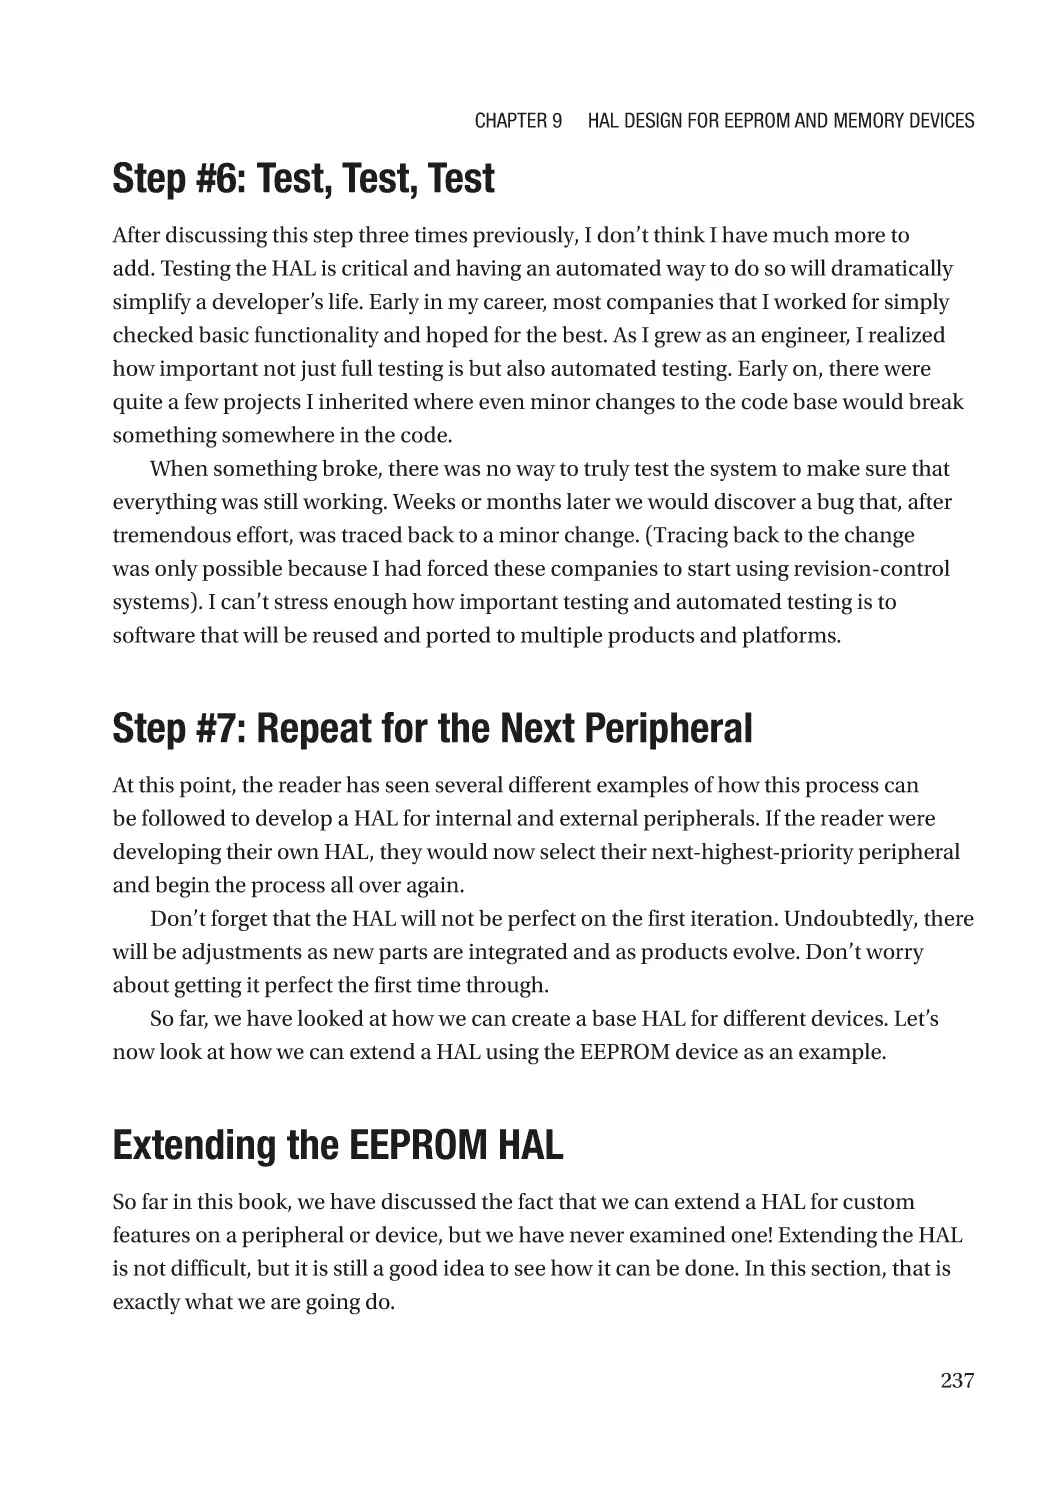 Step #6
Step #7
Extending the EEPROM HAL